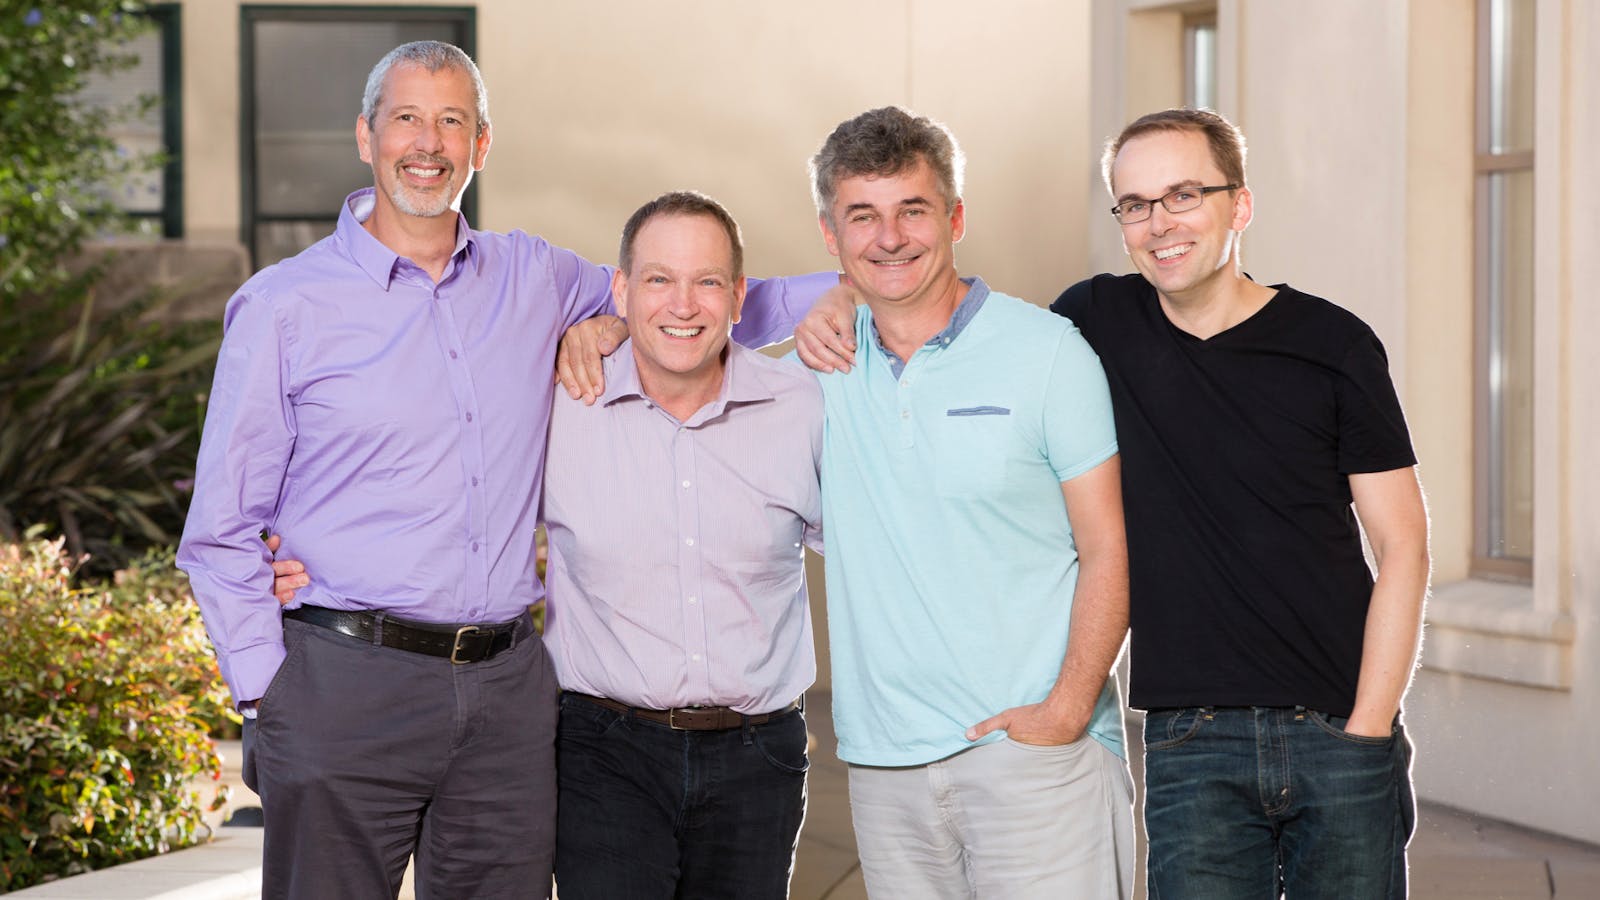 Snowflake's executive leaders (from left) Thierry Cruanes, co-founder and architect; Bob Muglia, CEO; Benoit Dageville, co-founder and CTO; Marcin Zukowski, co-founder. Photo by Snowflake